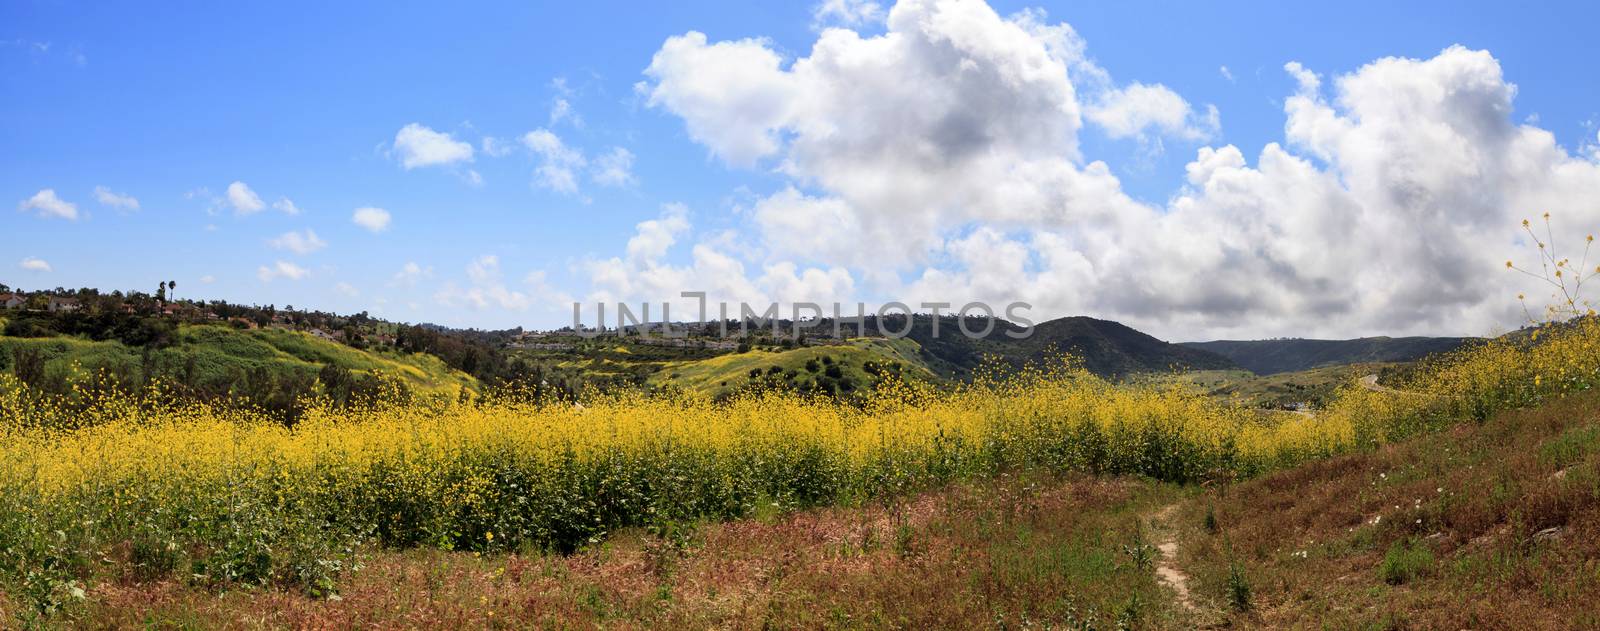 Aliso Viejo Wilderness Park view with yellow wild flowers and green rolling hills from the top hill in Aliso Viejo, California, United States